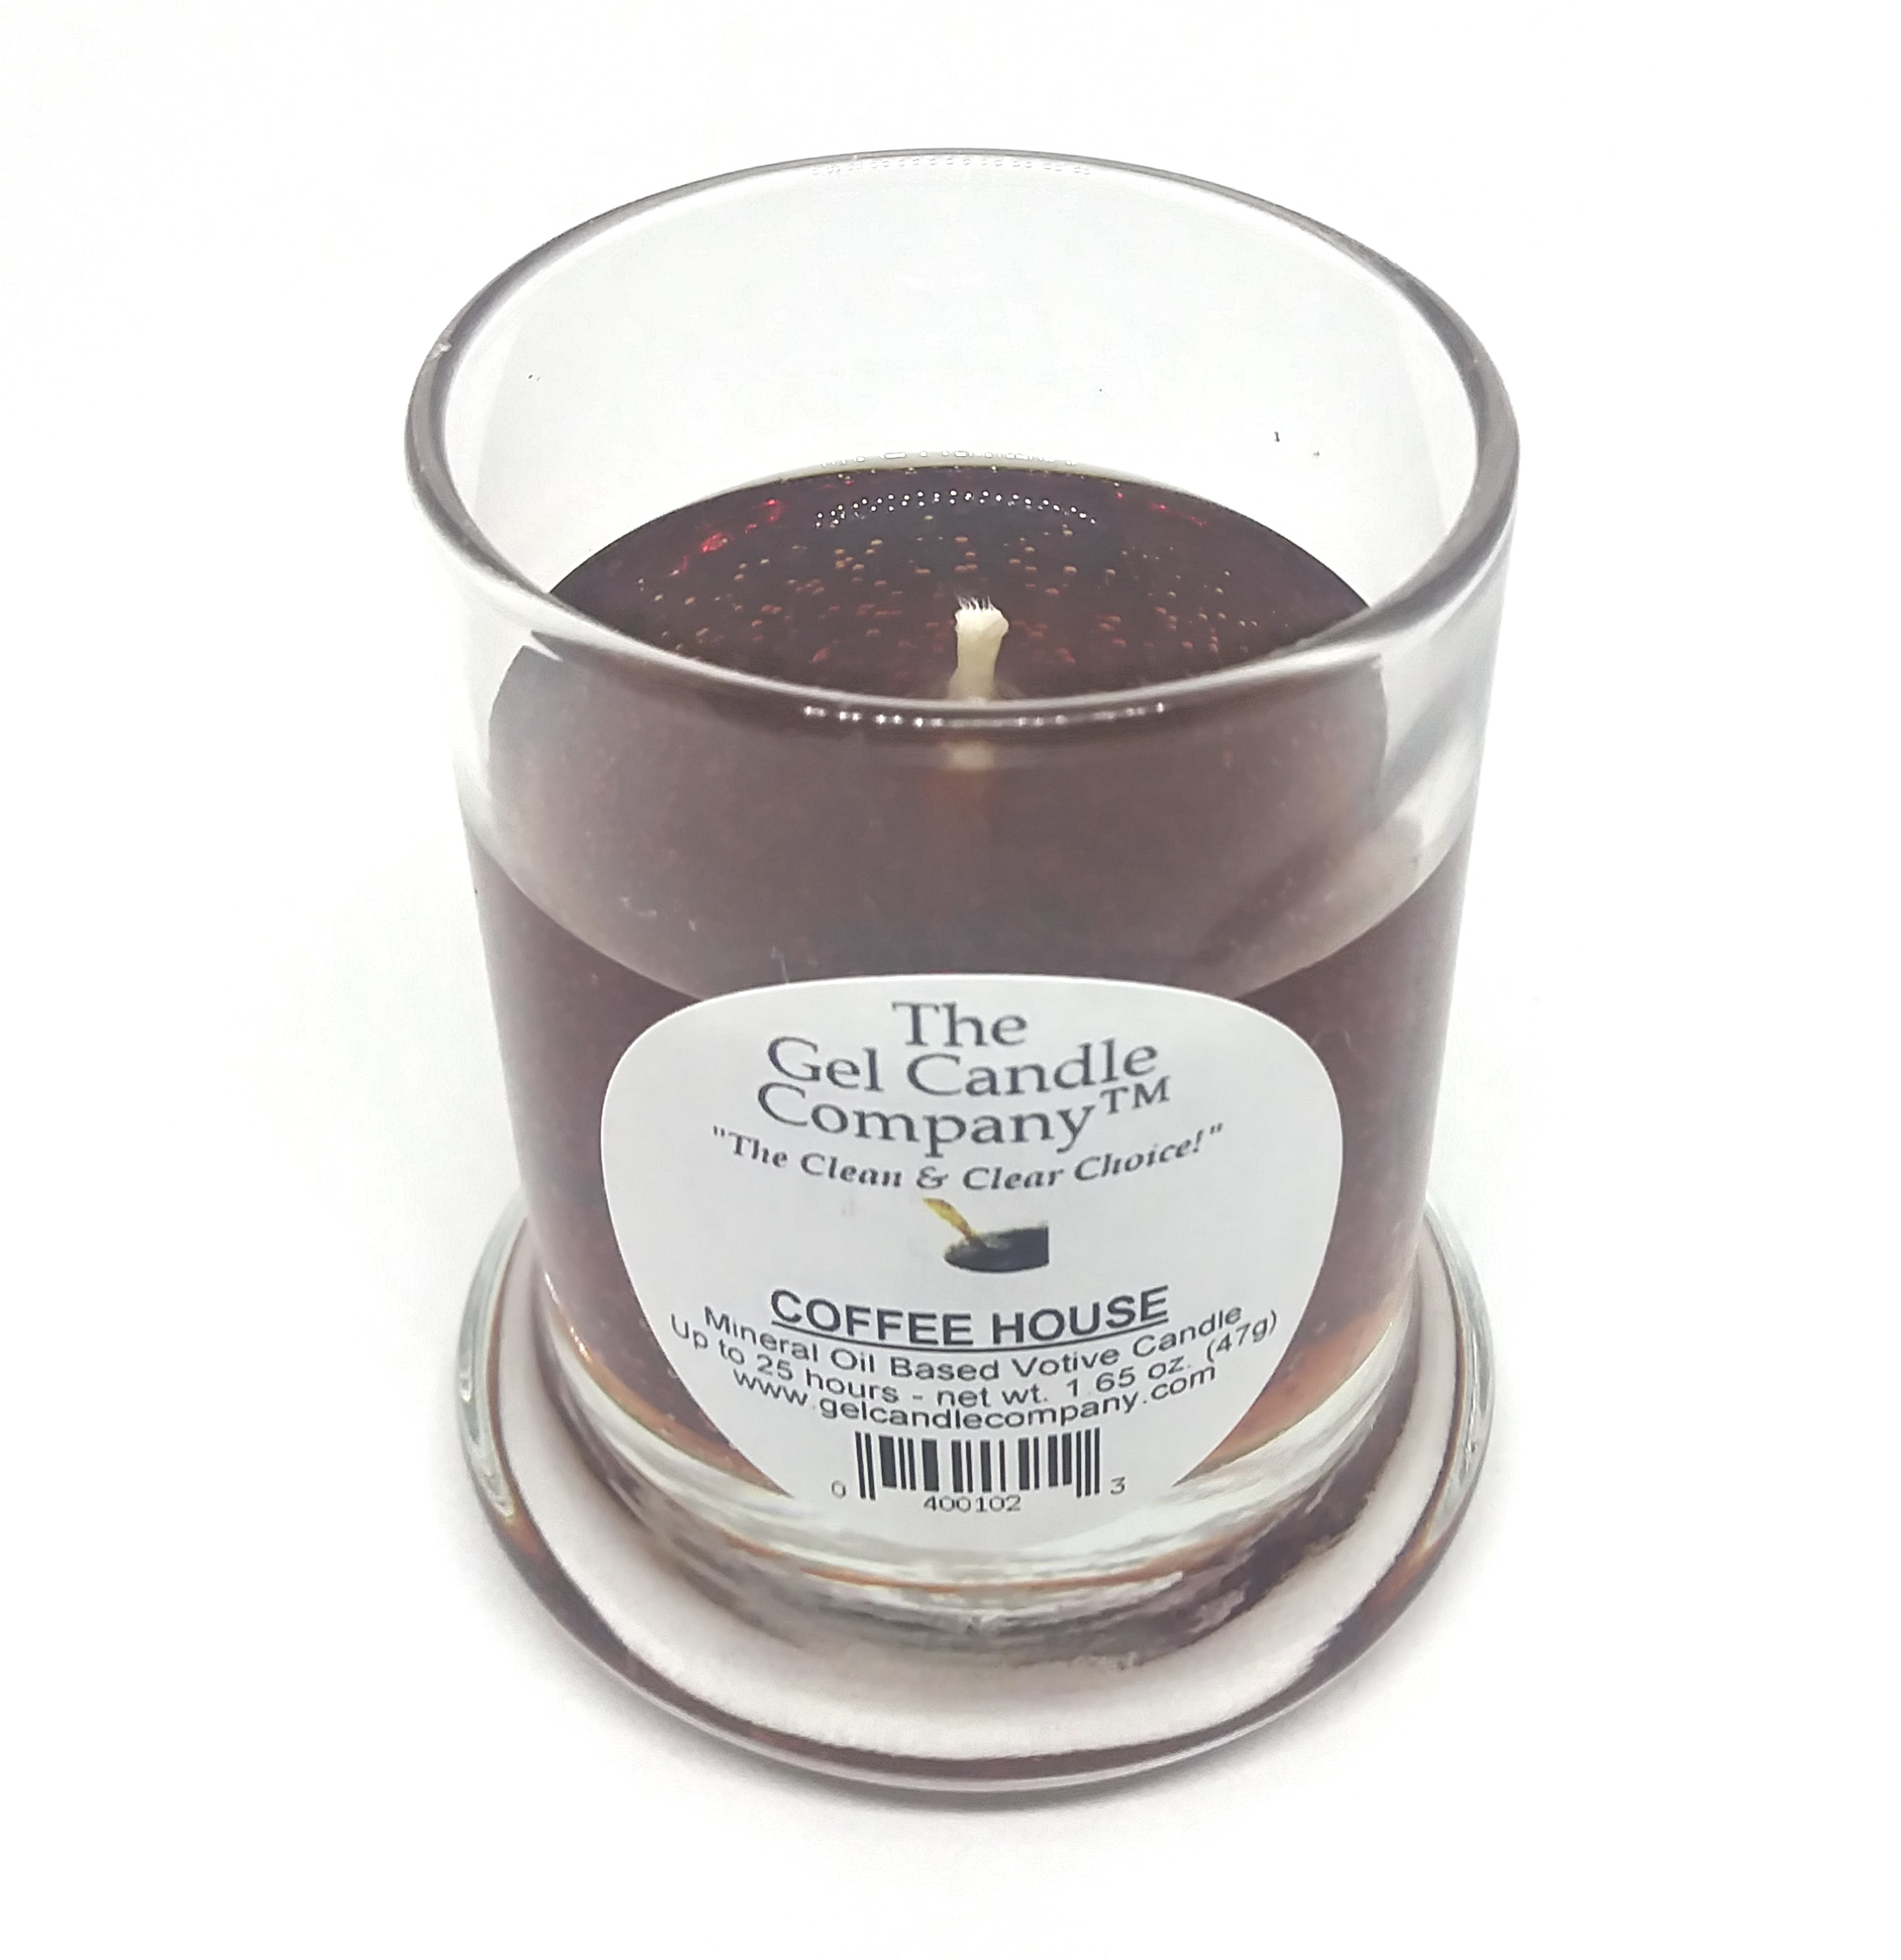 Coffee House Scented Gel Candle Votive - Click Image to Close